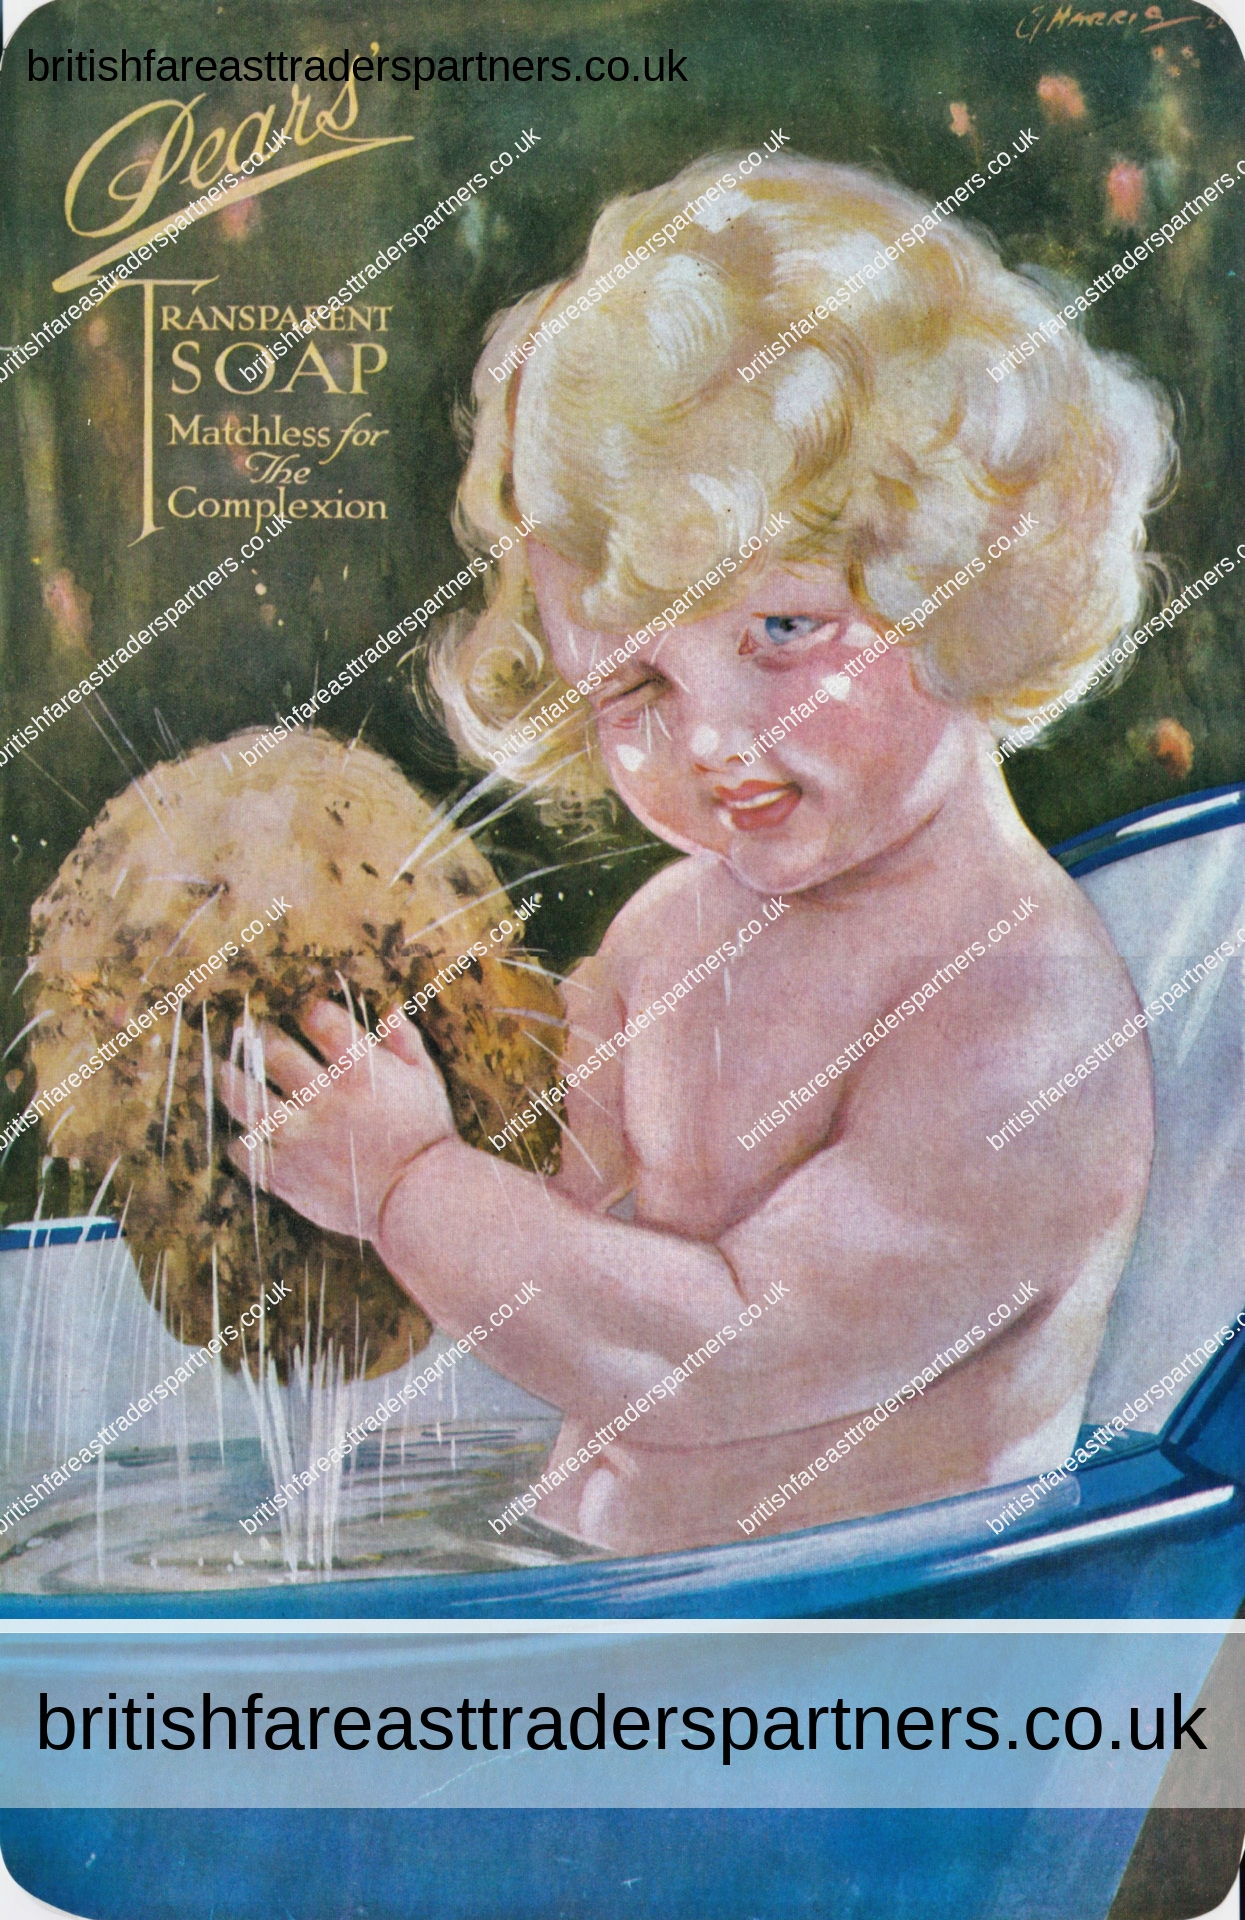 ANTIQUE 1920 PEARS’ TRANSPARENT SOAP PRINT AD ILLUSTRATED LONDON NEWS ADVERTISING COLLECTABLES | VINTAGE & ANTIQUES | BRITISH GOODS  | LONDON | UNITED KINGDOM |  SOAP | GROOMING & VANITY | LIFESTYLE | PRINTS | EPHEMERA